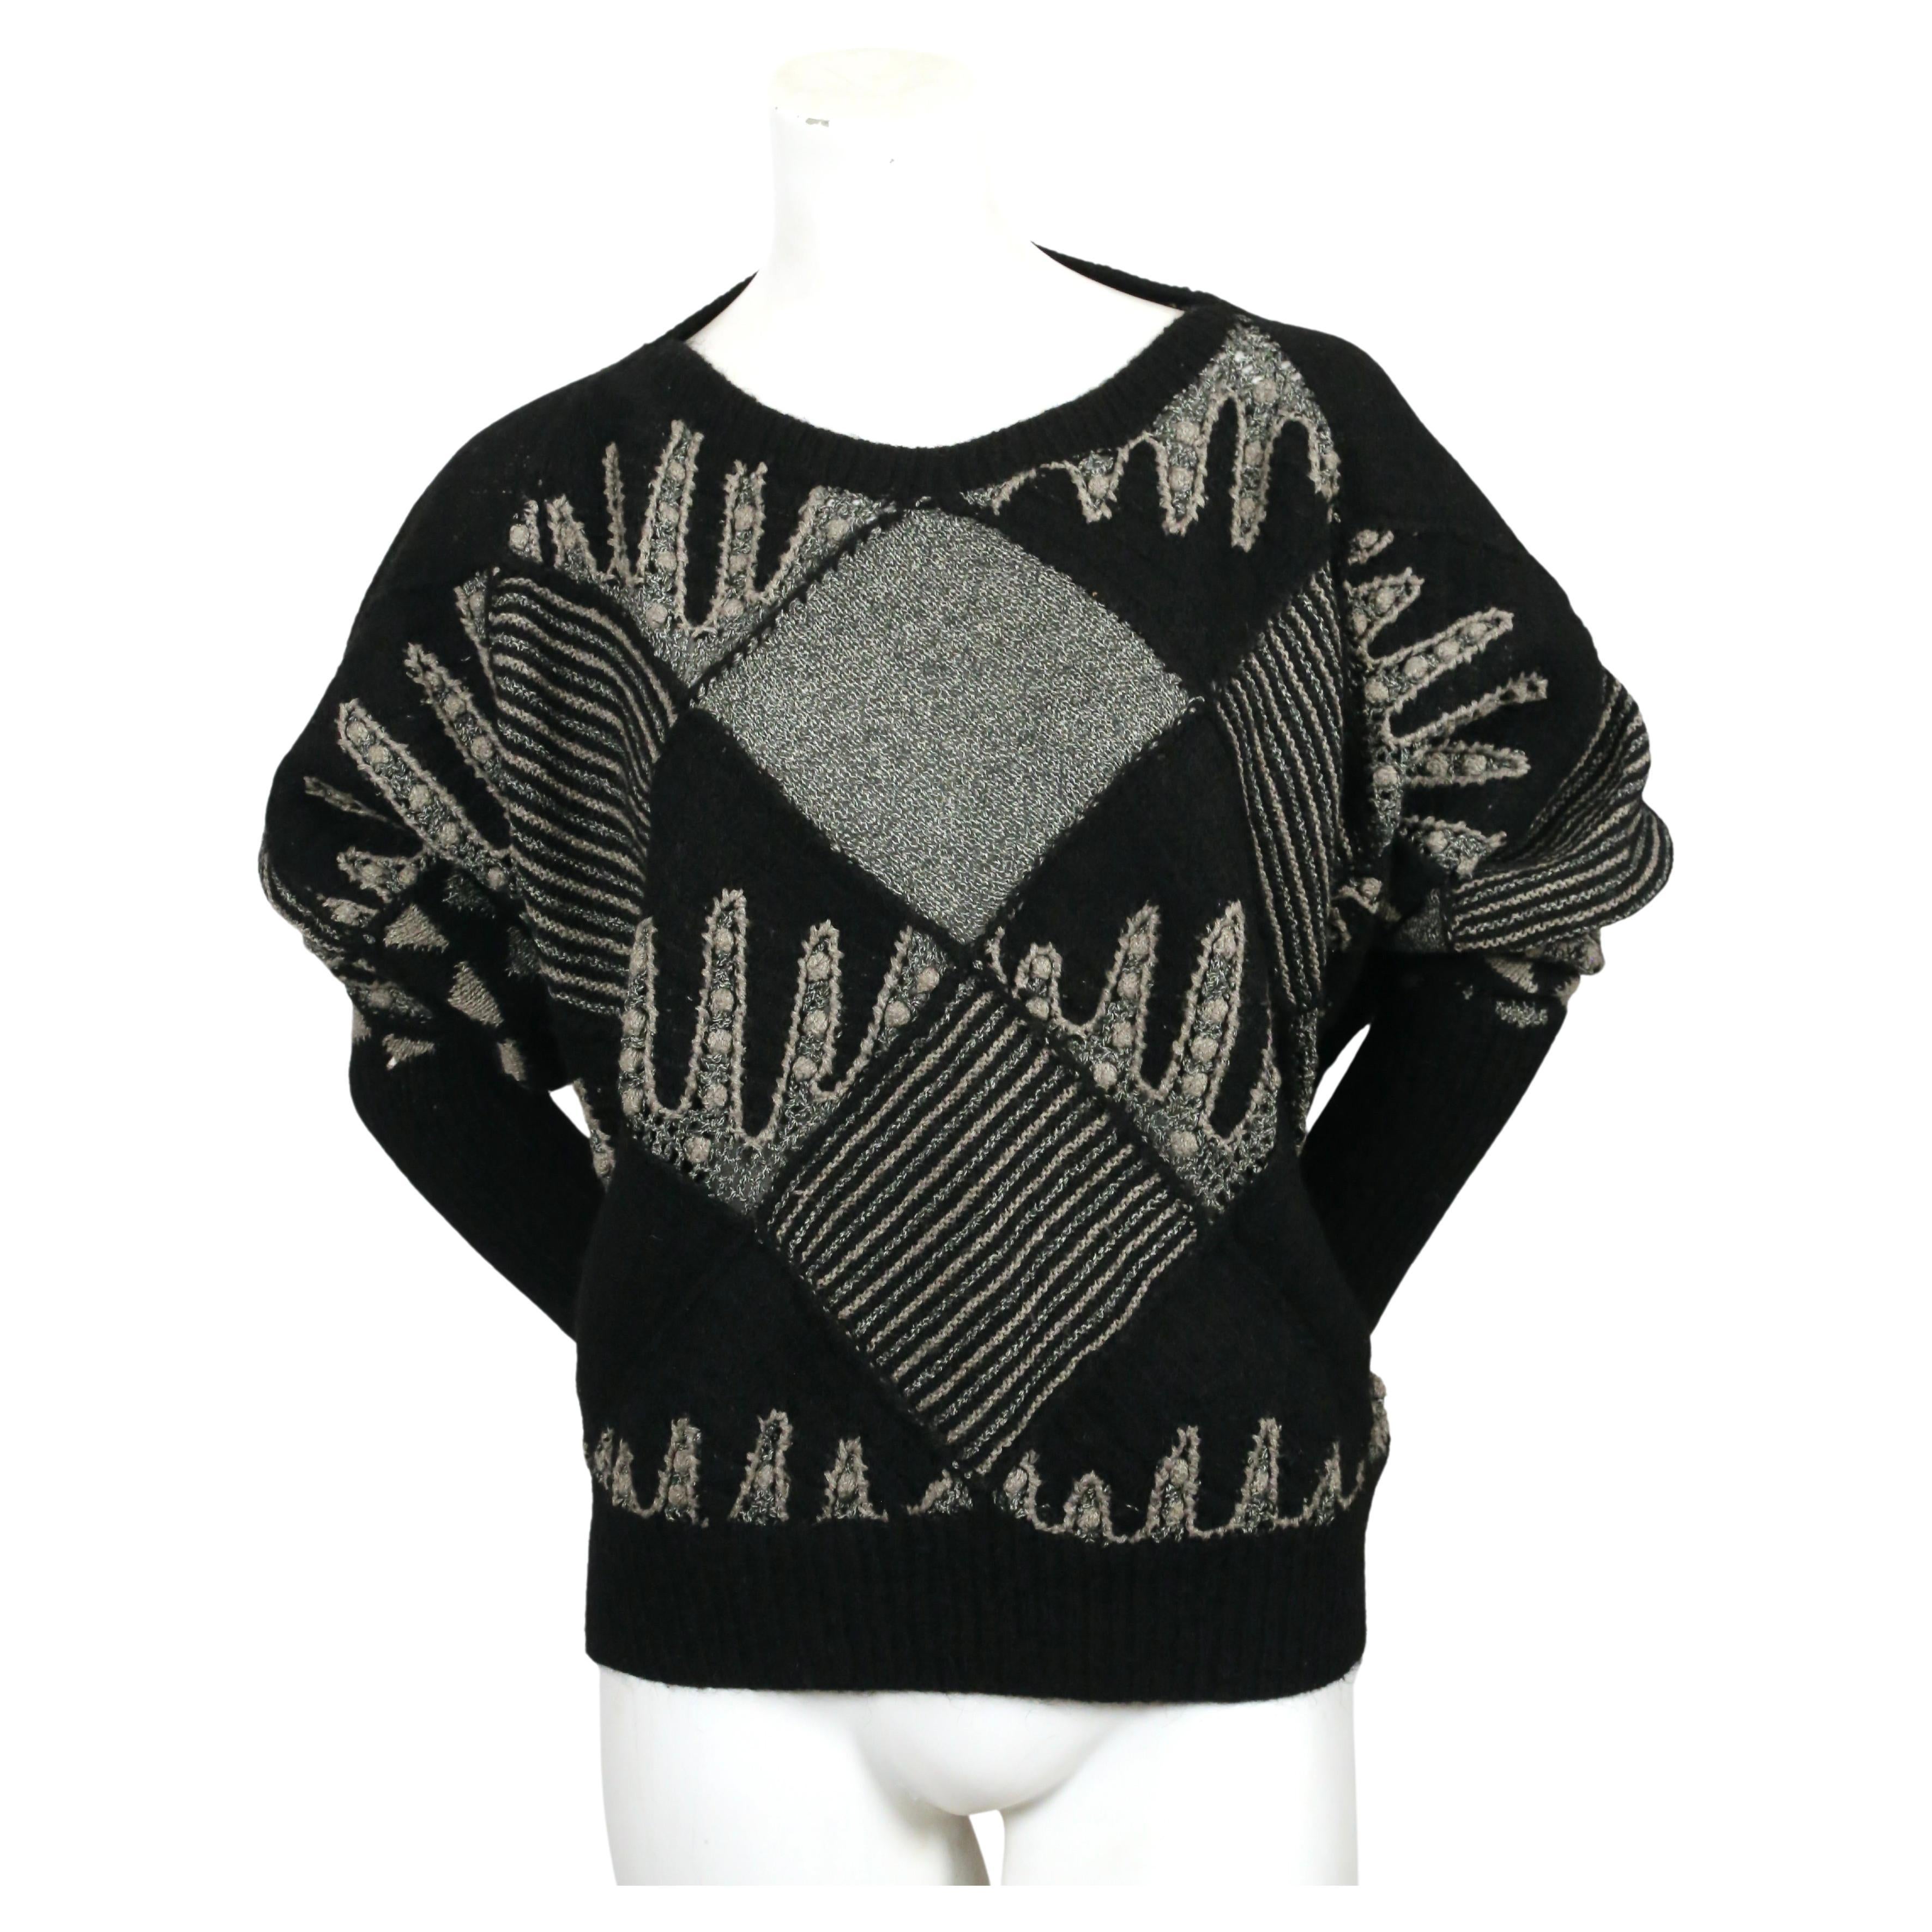 Very rare, geometric knit sweater with dolman sleeves designed by Issey Miyake dating to the early 1980's. Sweater features several different knitting techniques. Labeled a size M. Approximate measurements: bust 56